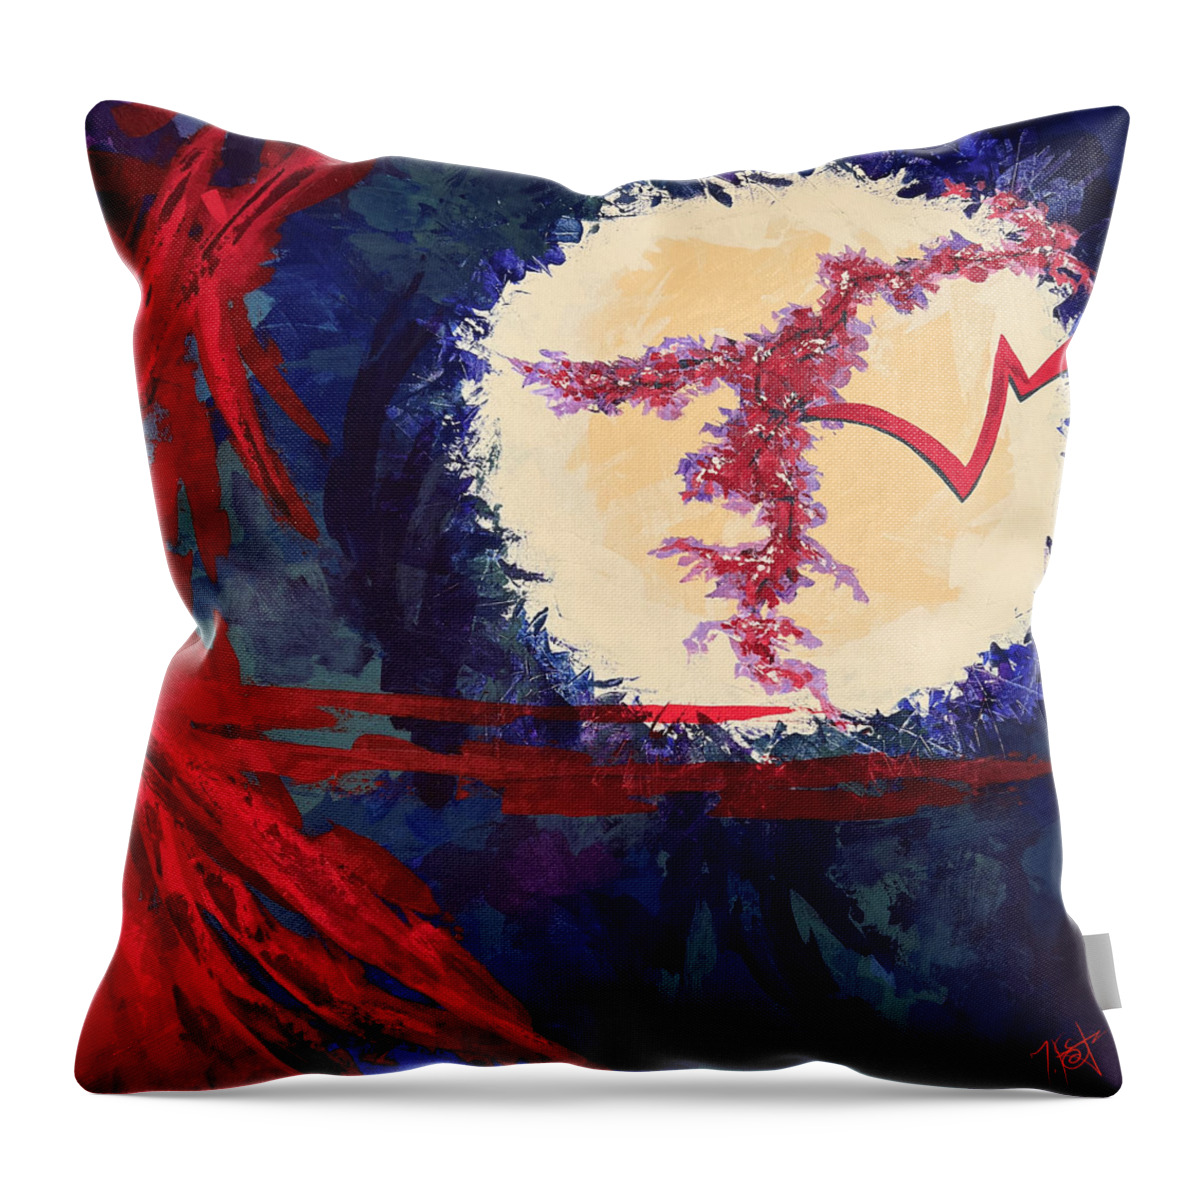 Abstract Throw Pillow featuring the painting Rift by Tes Scholtz